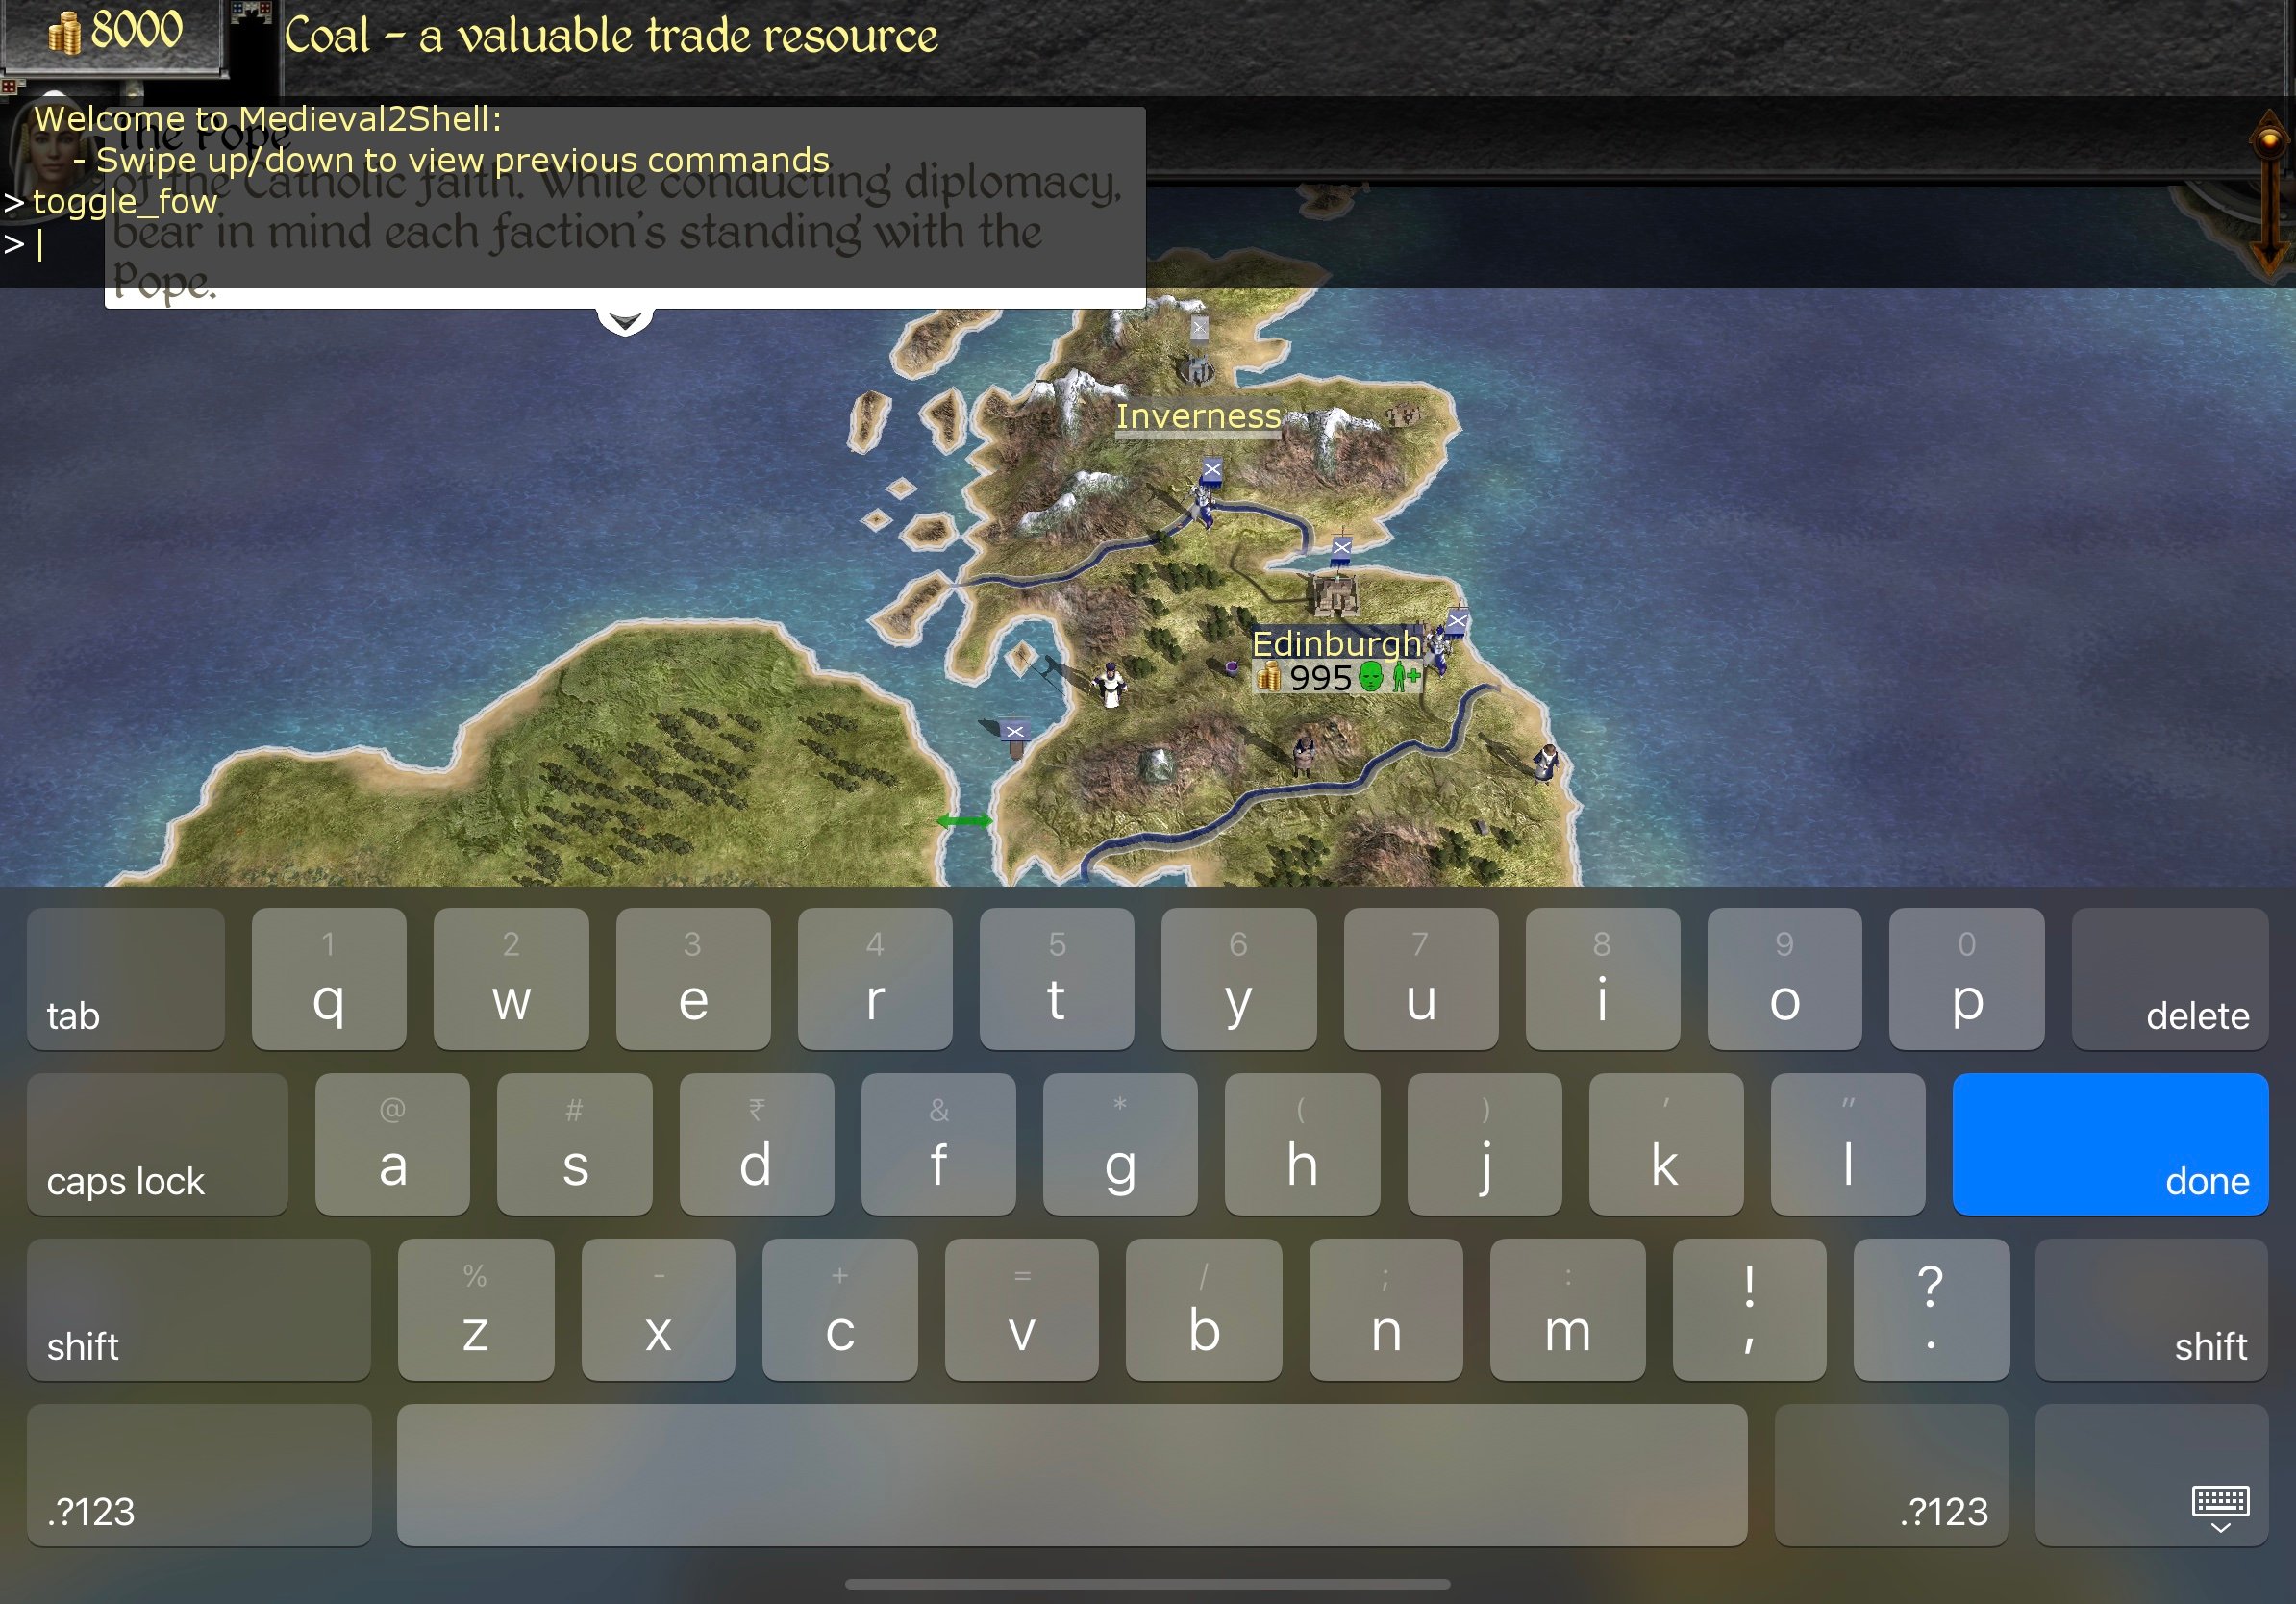 Iconic PC strategy game 'ROME: Total War' launching on iPad this